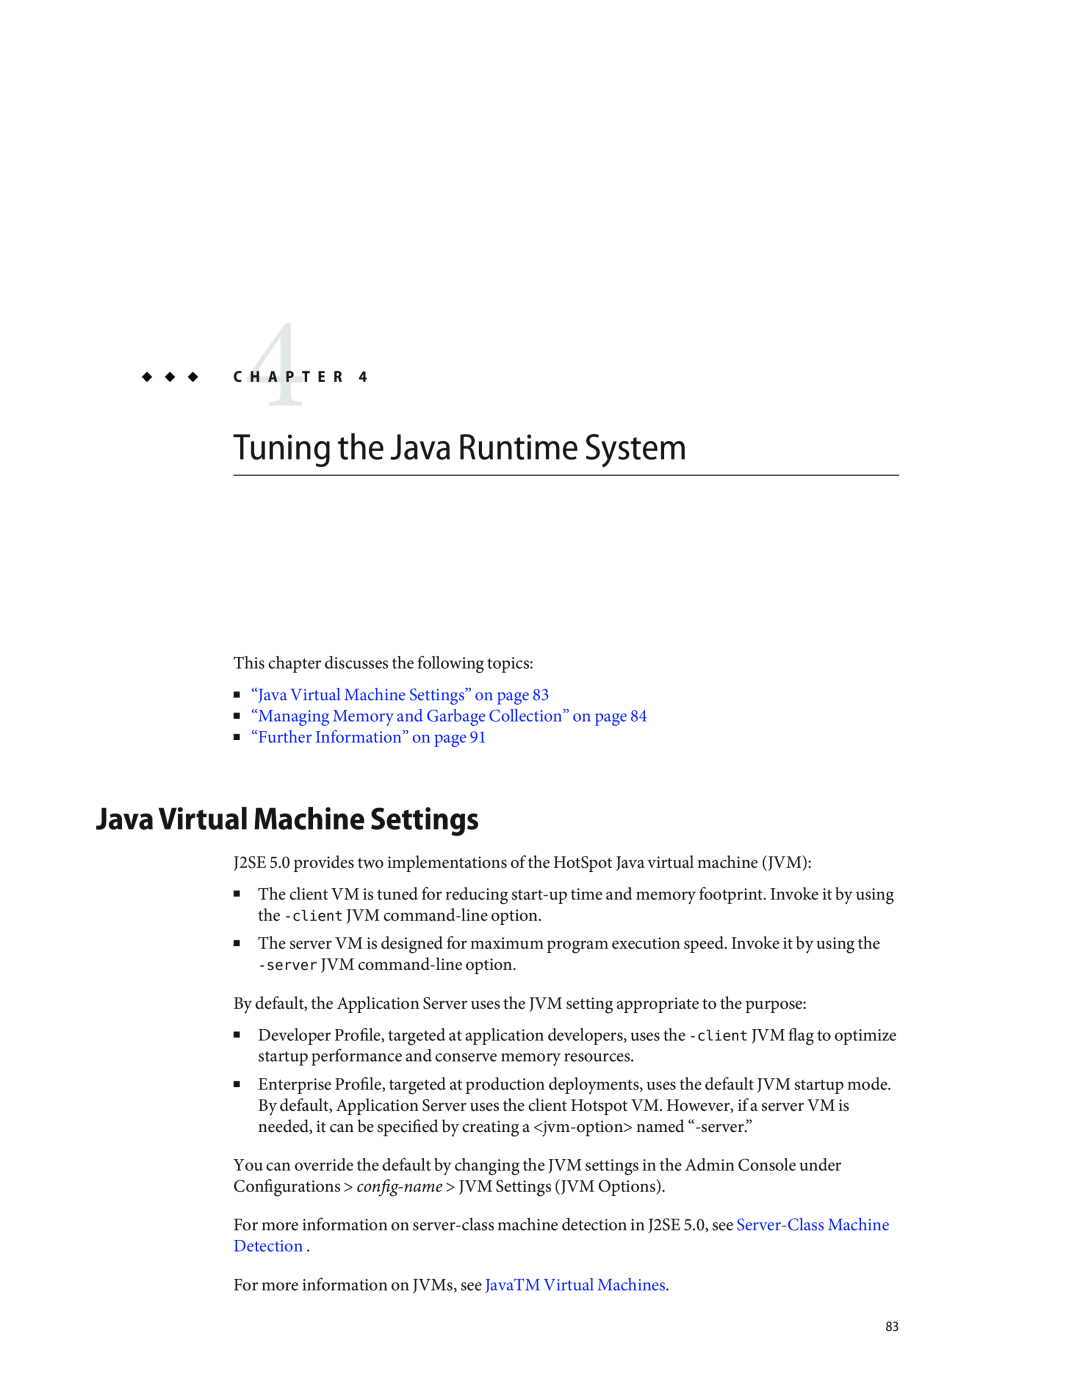 Sun Microsystems 820434310 Tuning the Java Runtime System, Java Virtual Machine Settings, “Further Information” on page 